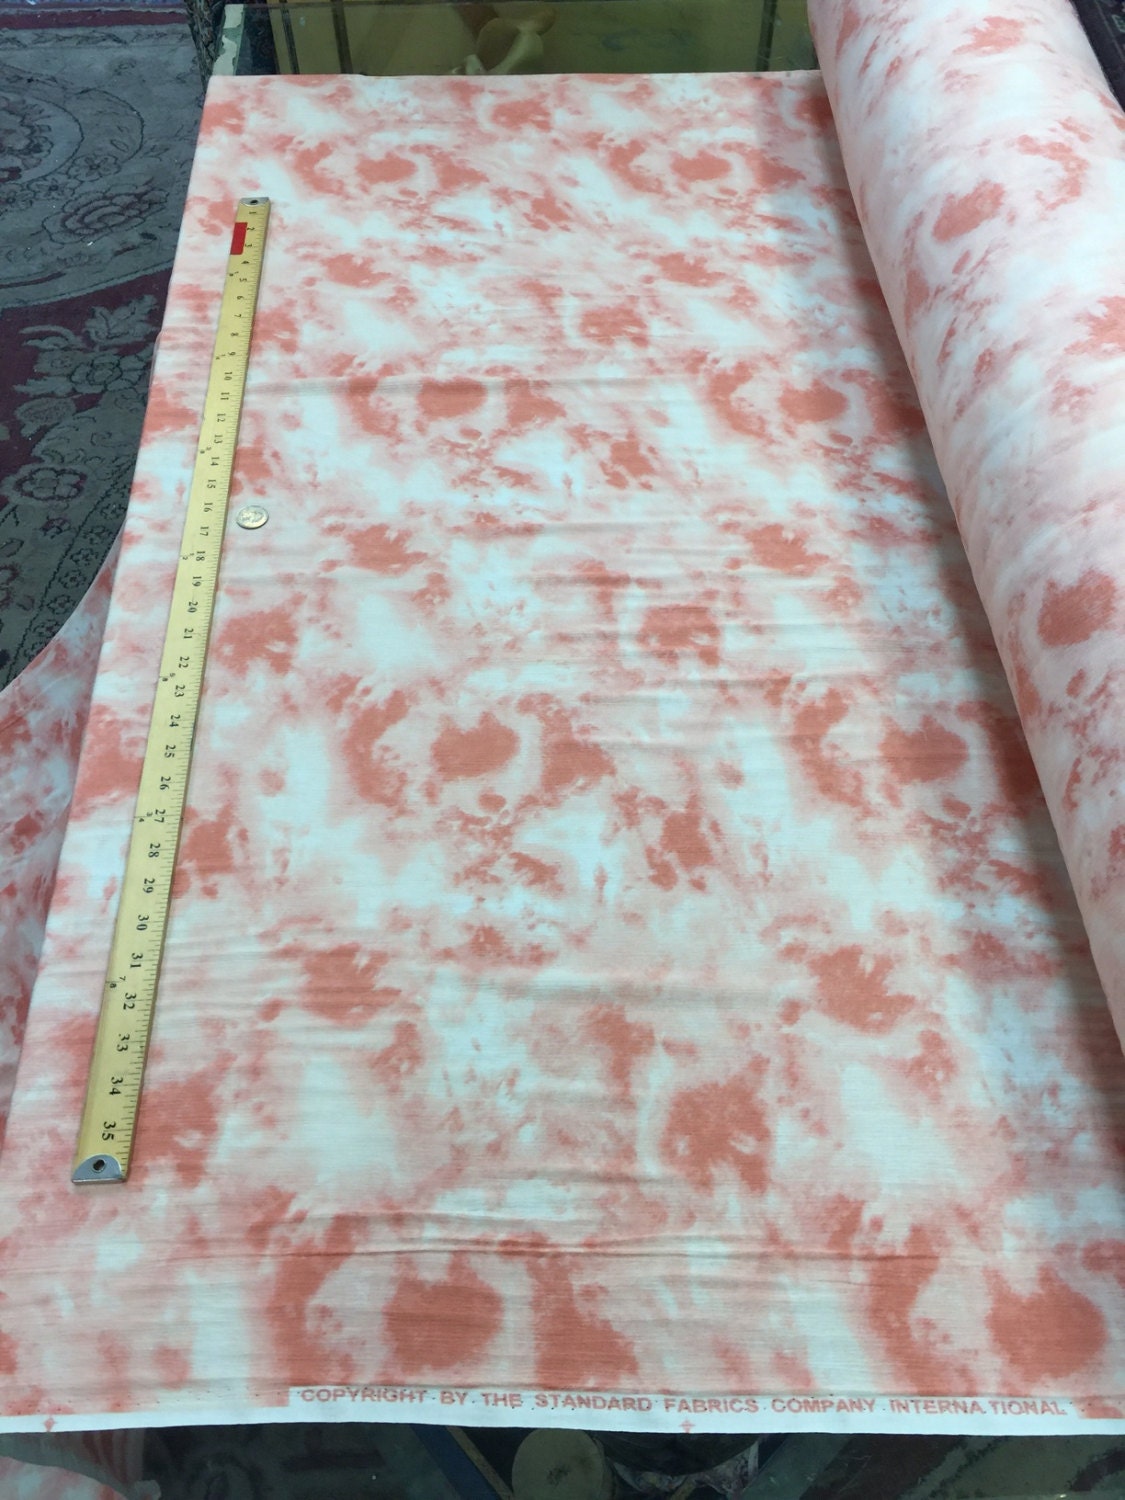 Rayon crepon Blush Peach abstract 51-52 in w Fabric by the yard soft organic kids dress draping clothing decoration flowy fabric